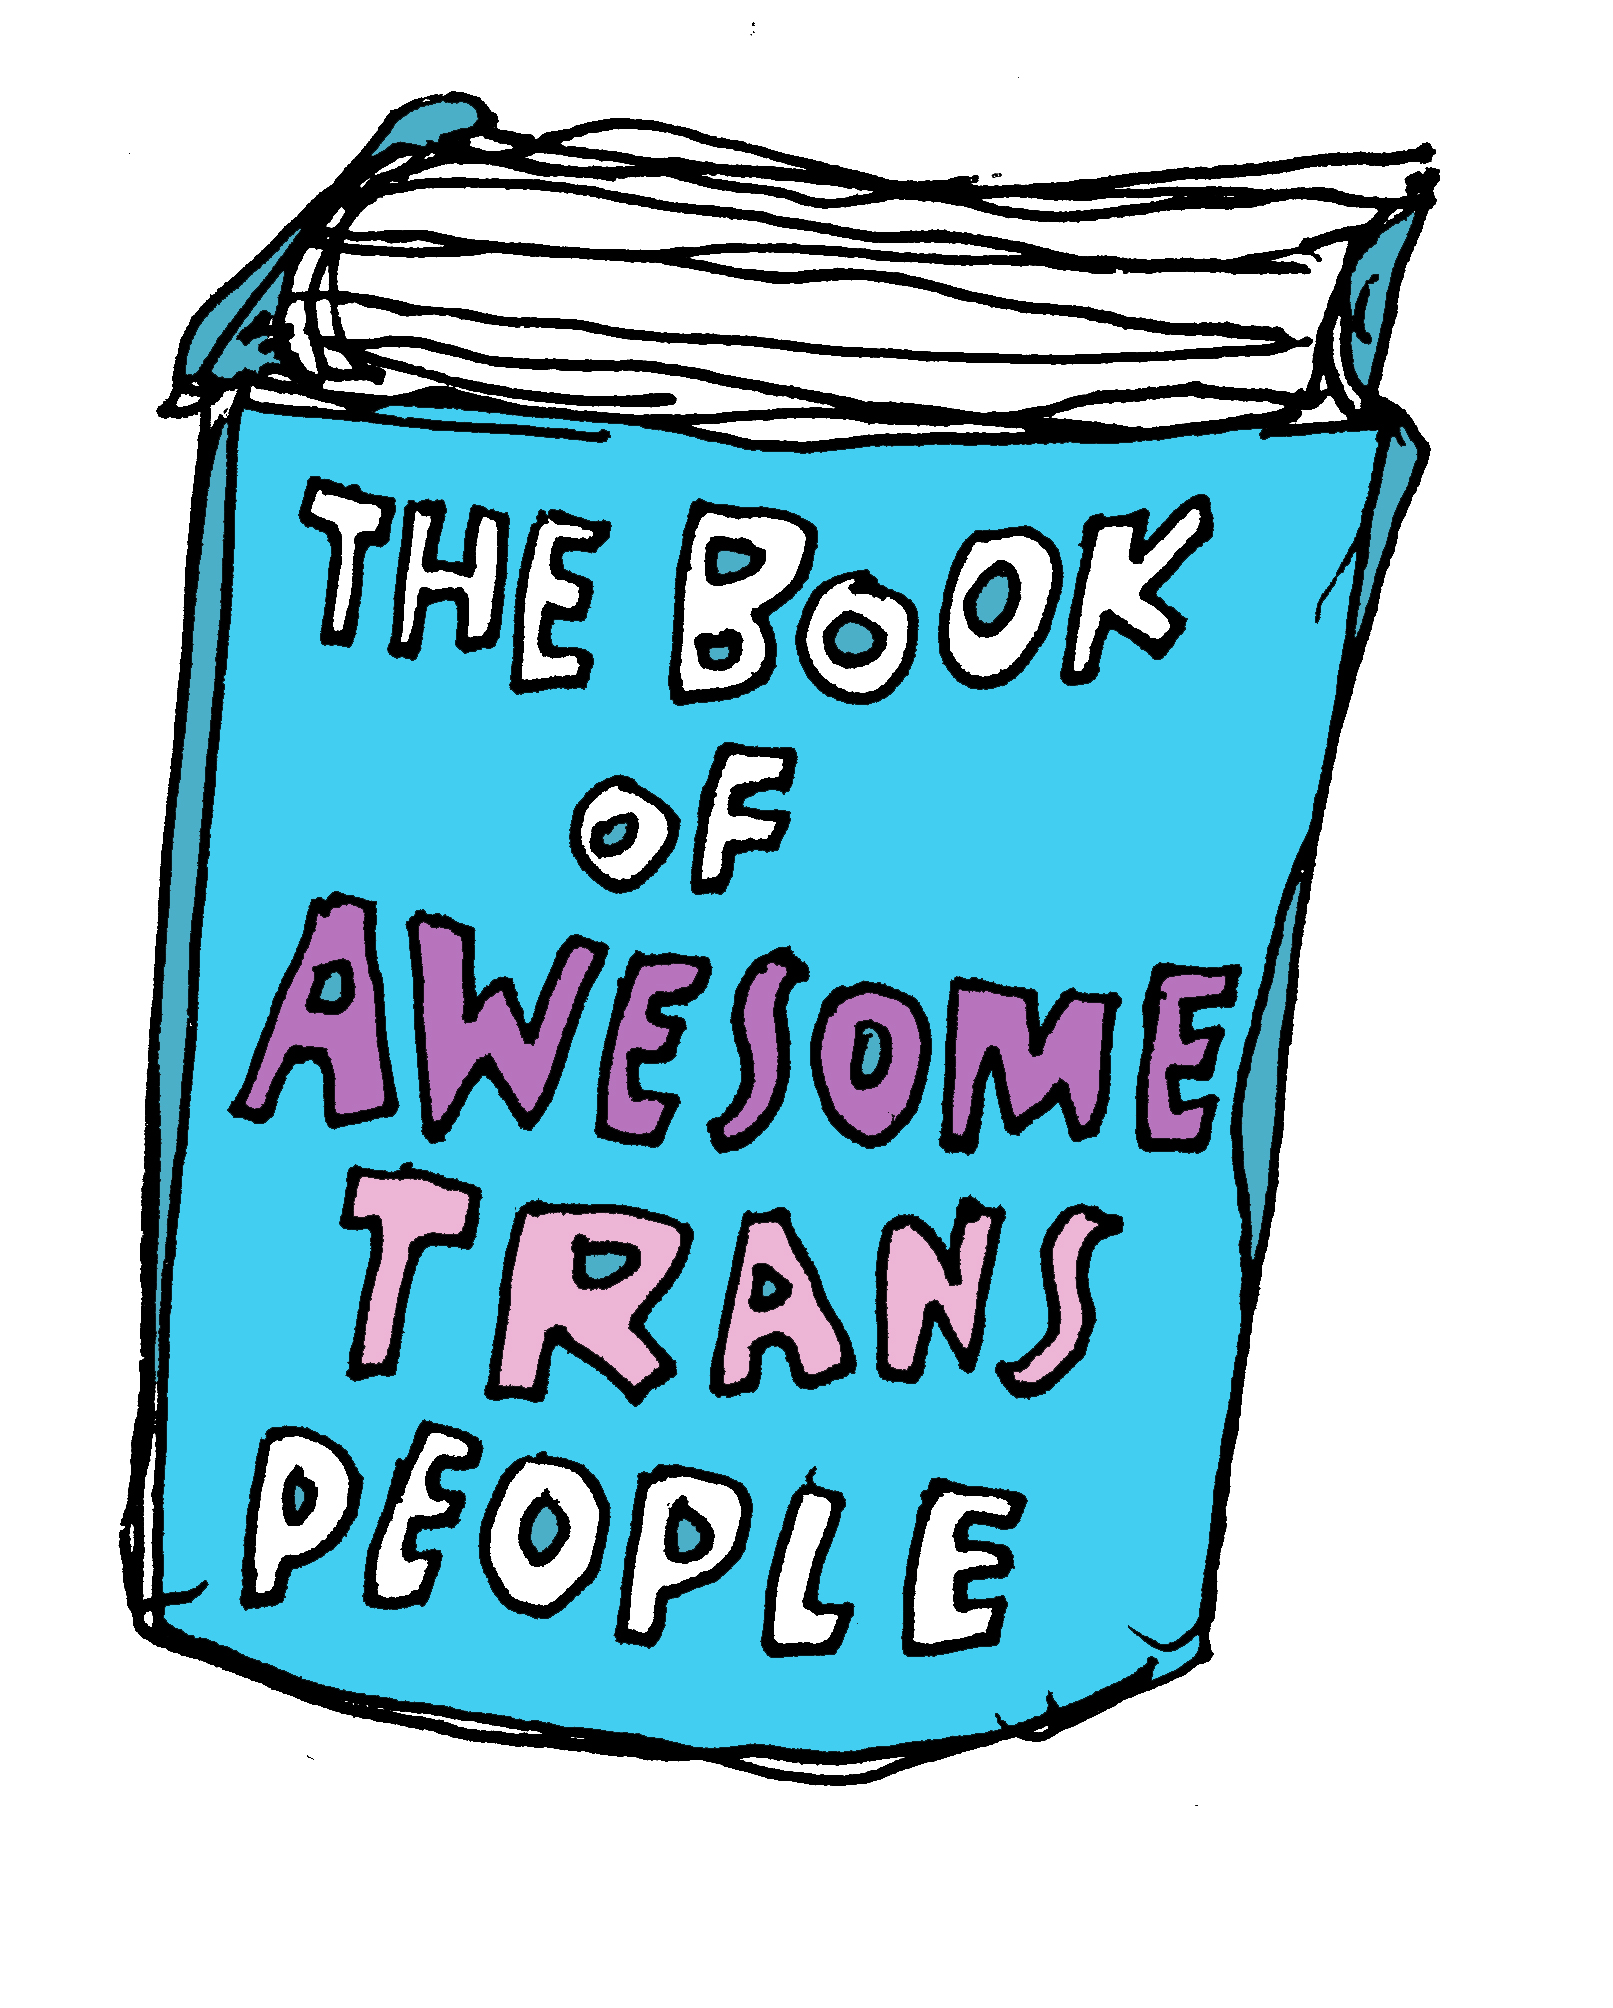 An illustration of a book, the cover says "The book of awesome trans people."